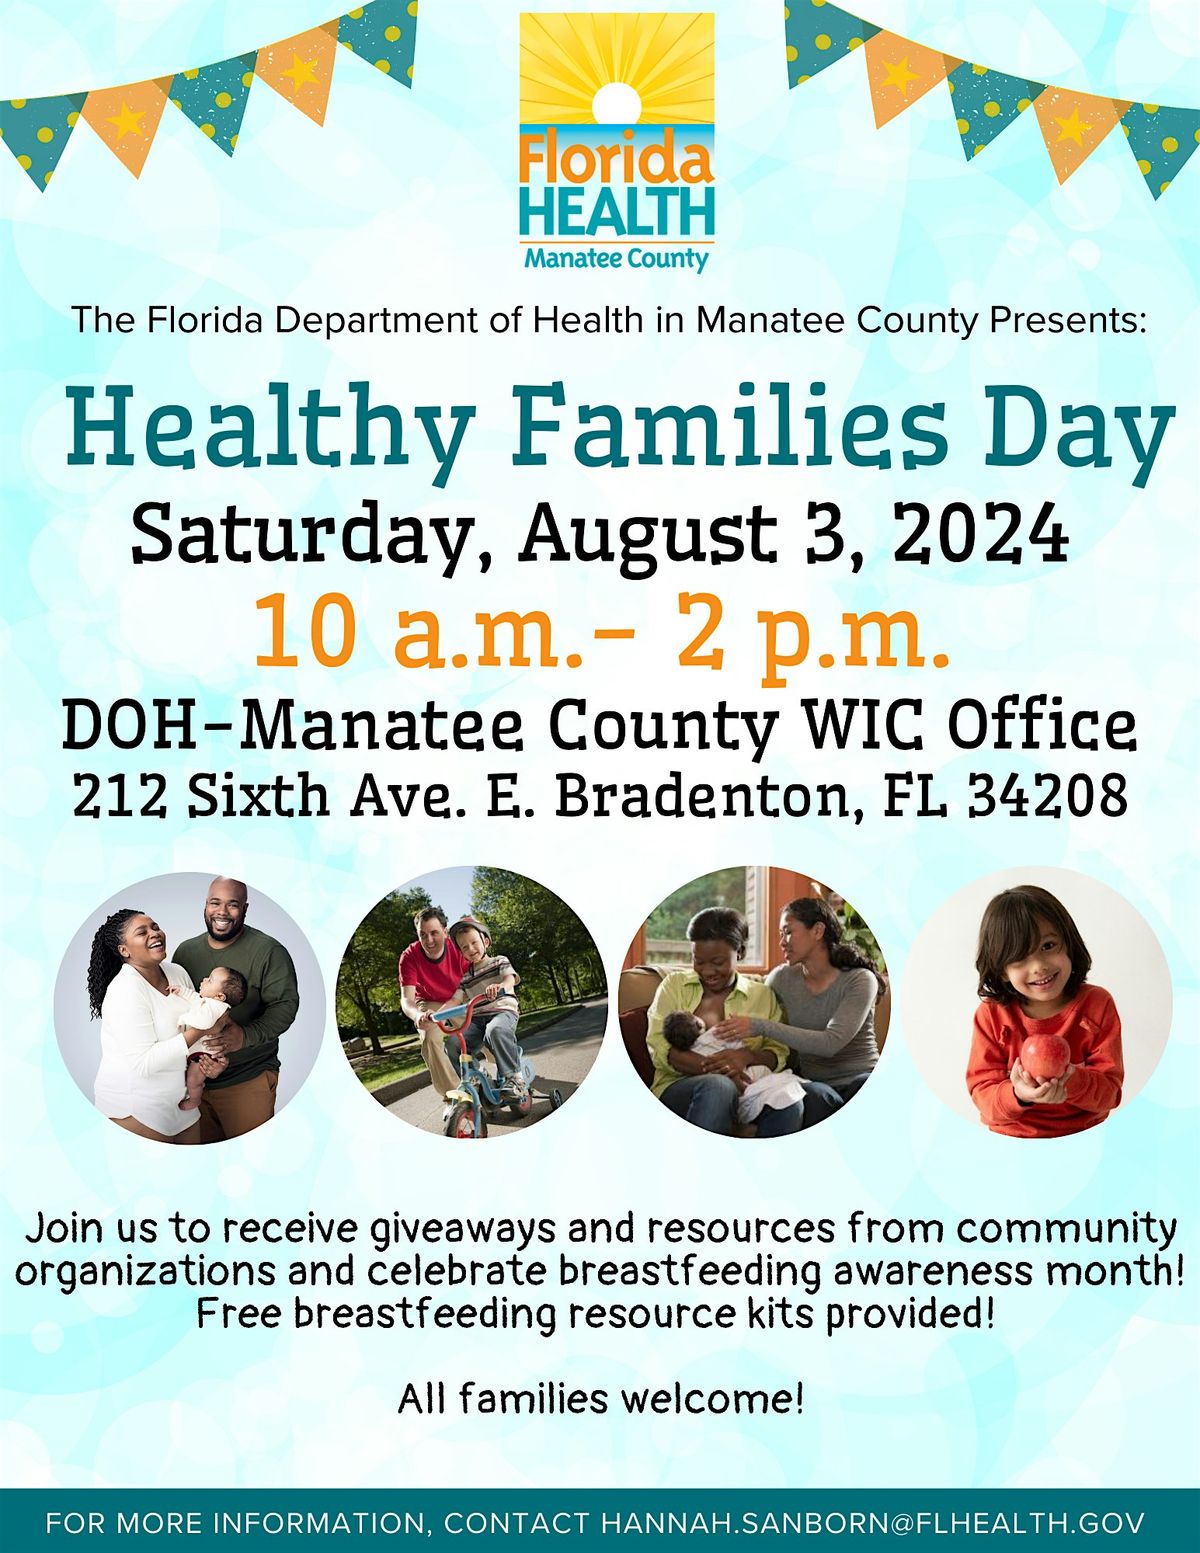 Healthy Families Day